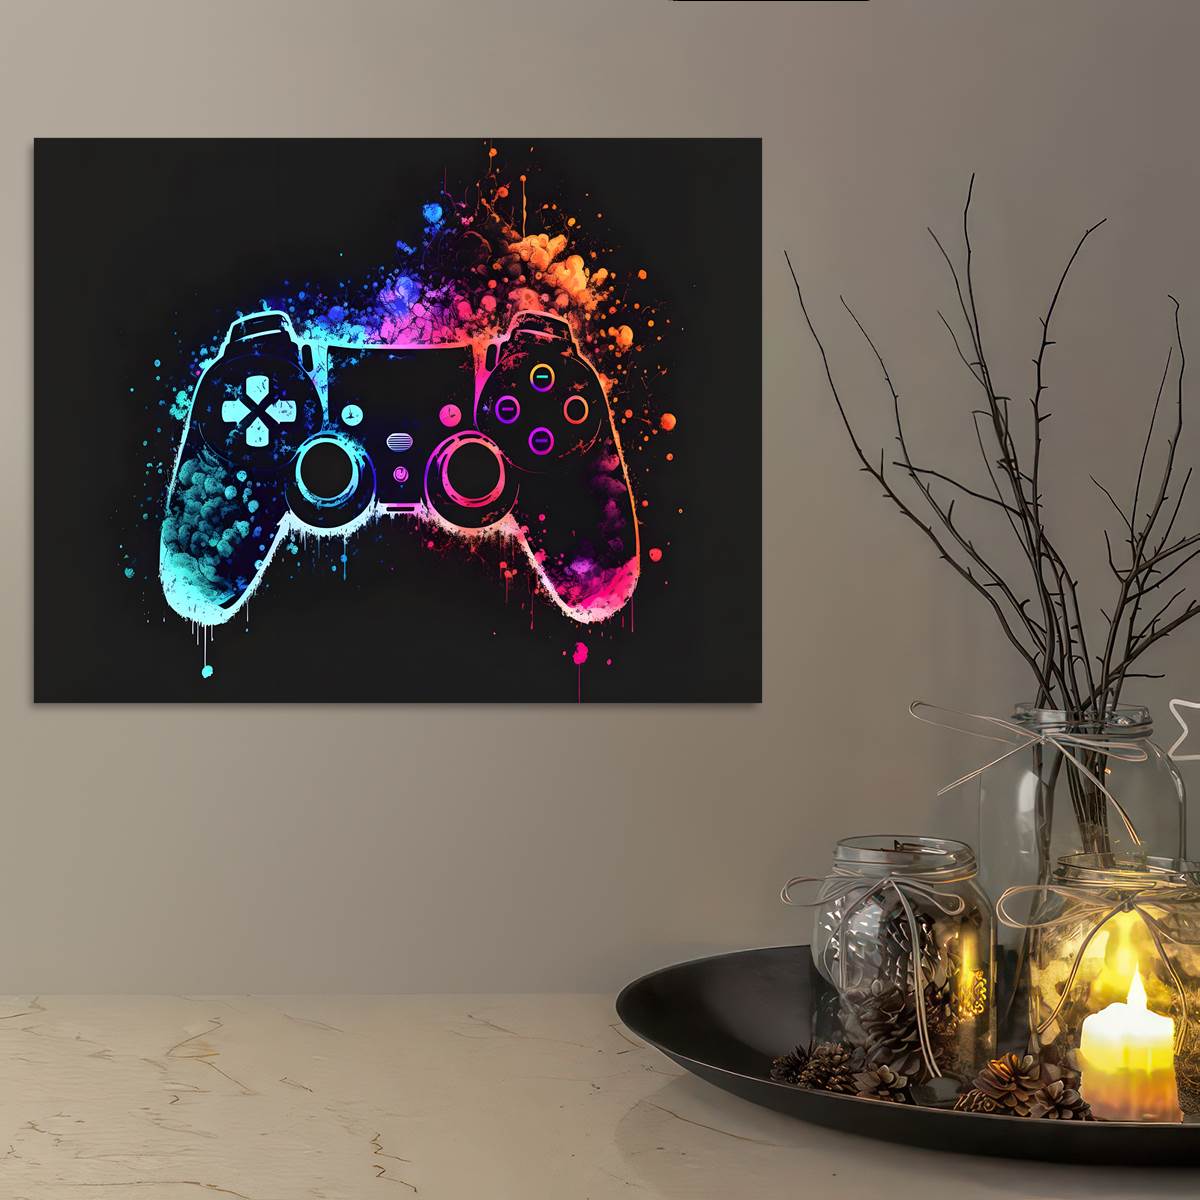 1pc Neon-colored Gaming Room Poster, Game Room Decor, Bedroom Decor, Video  Game Inspirational Poster, Gaming Decor, Esports Bar Entertainment Venue